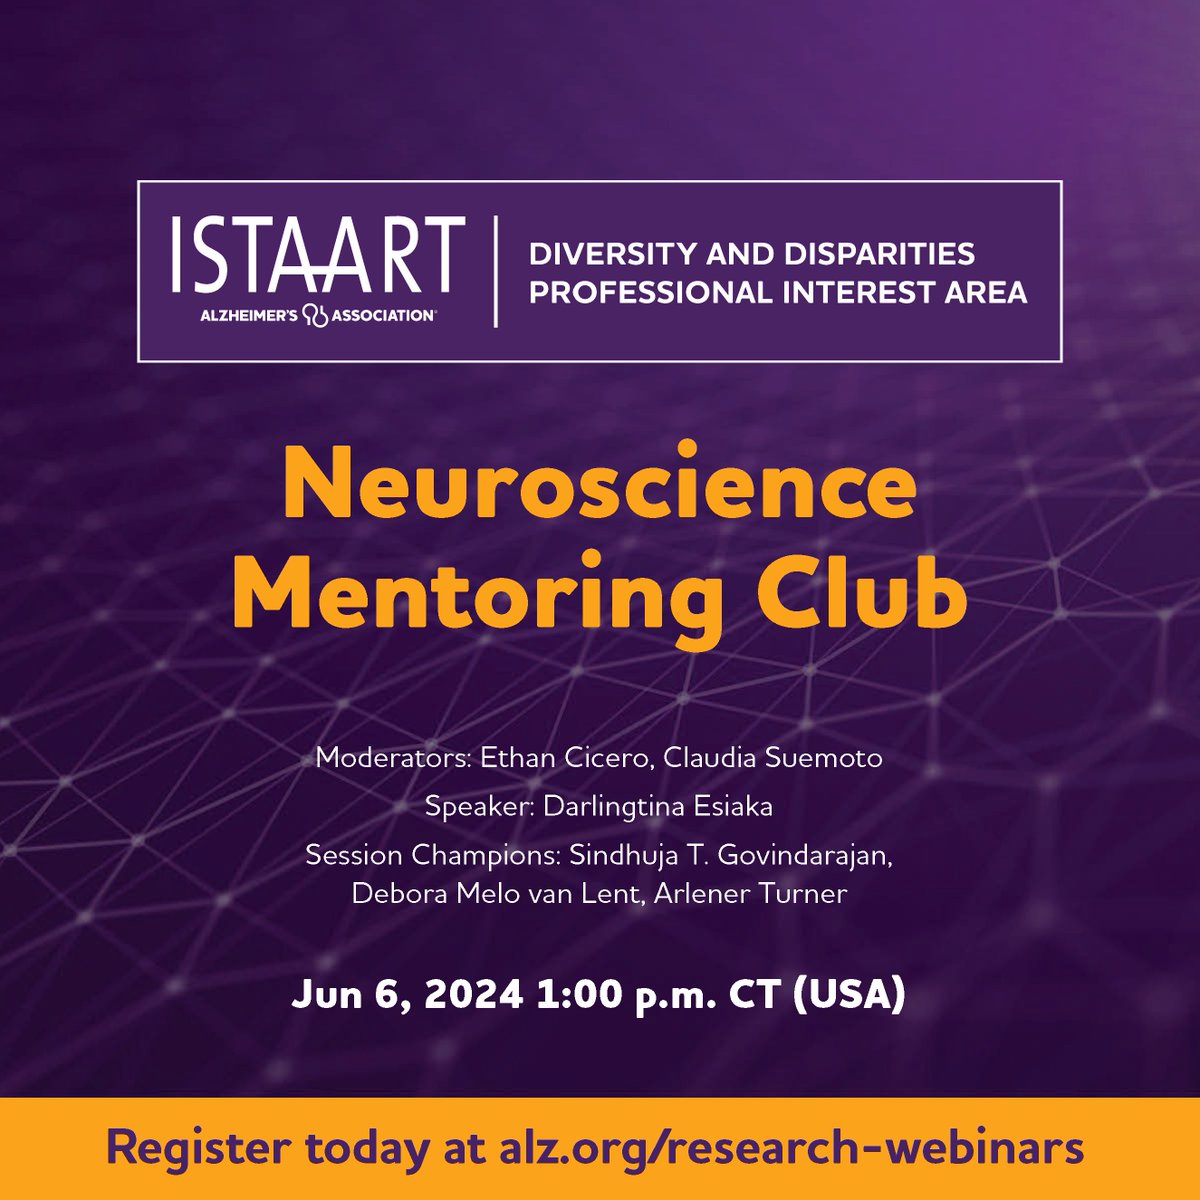 Our next Neuroscience Mentoring Club will be on June 6 (1pm, CT/USA). Join us for an engaged discussion w Dr Darlingtina Esiaka. Register at alz.org/research-webin… where you can submit ?s for Dr Esiaka and topics for our open forum discussion. #ENDAlz @ISTAART @Dkesiaka